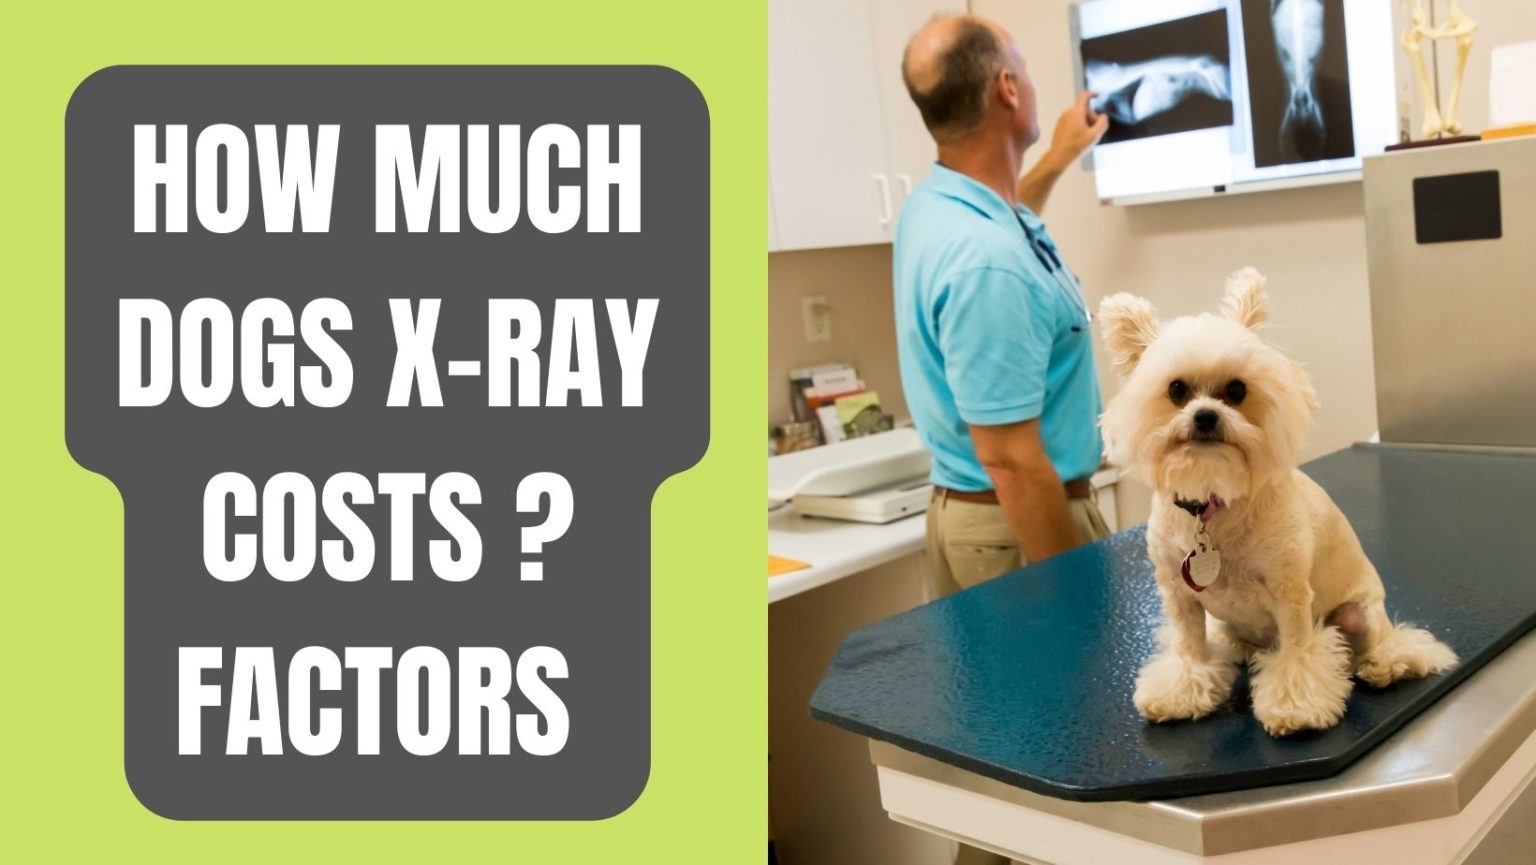 How Much Dog XRay Costs in 2022? Oxford Pets